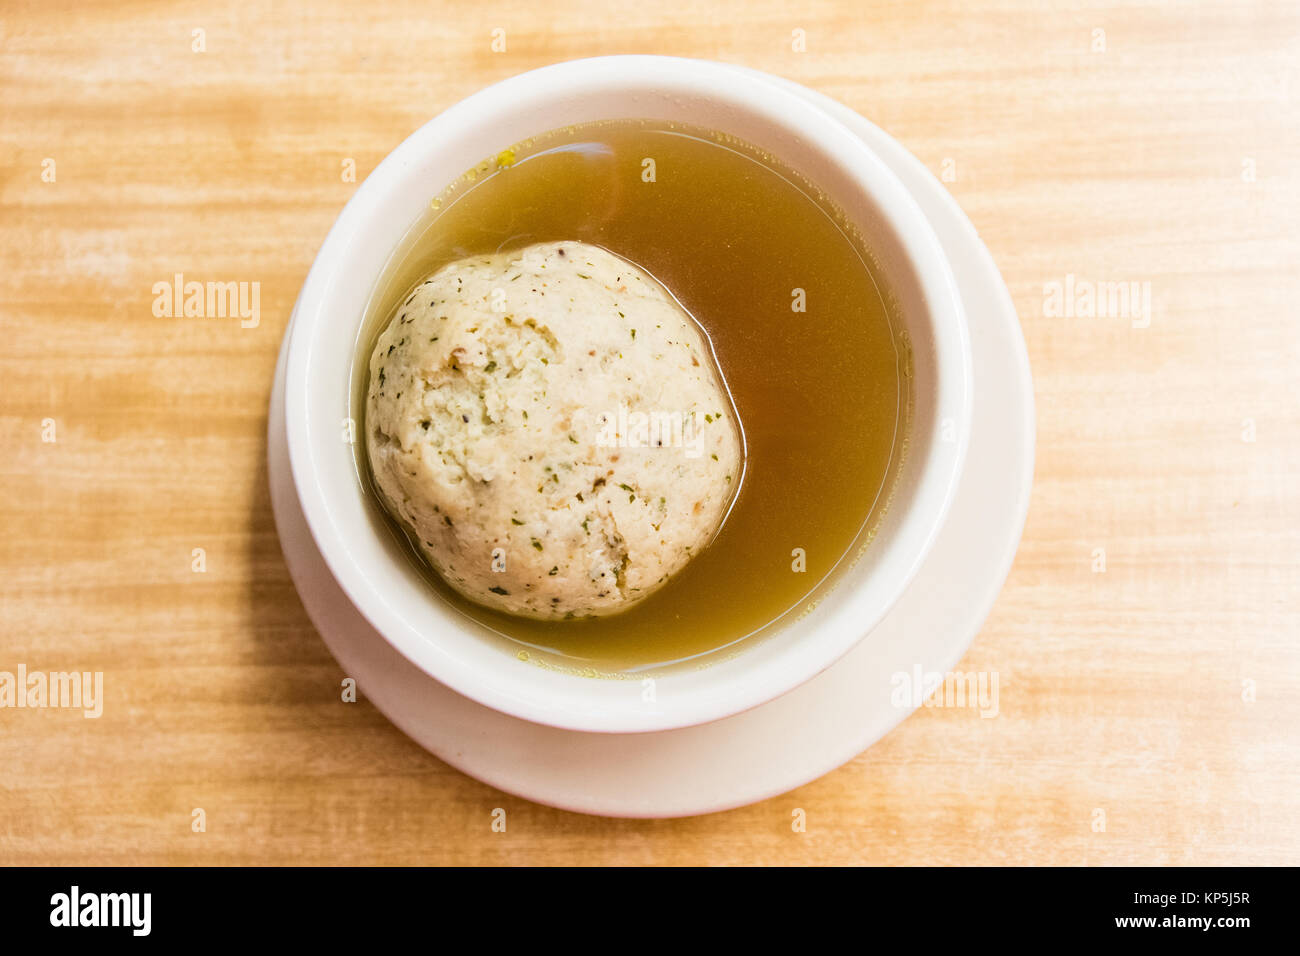 close up of large matzo ball in bowl of soup Stock Photo